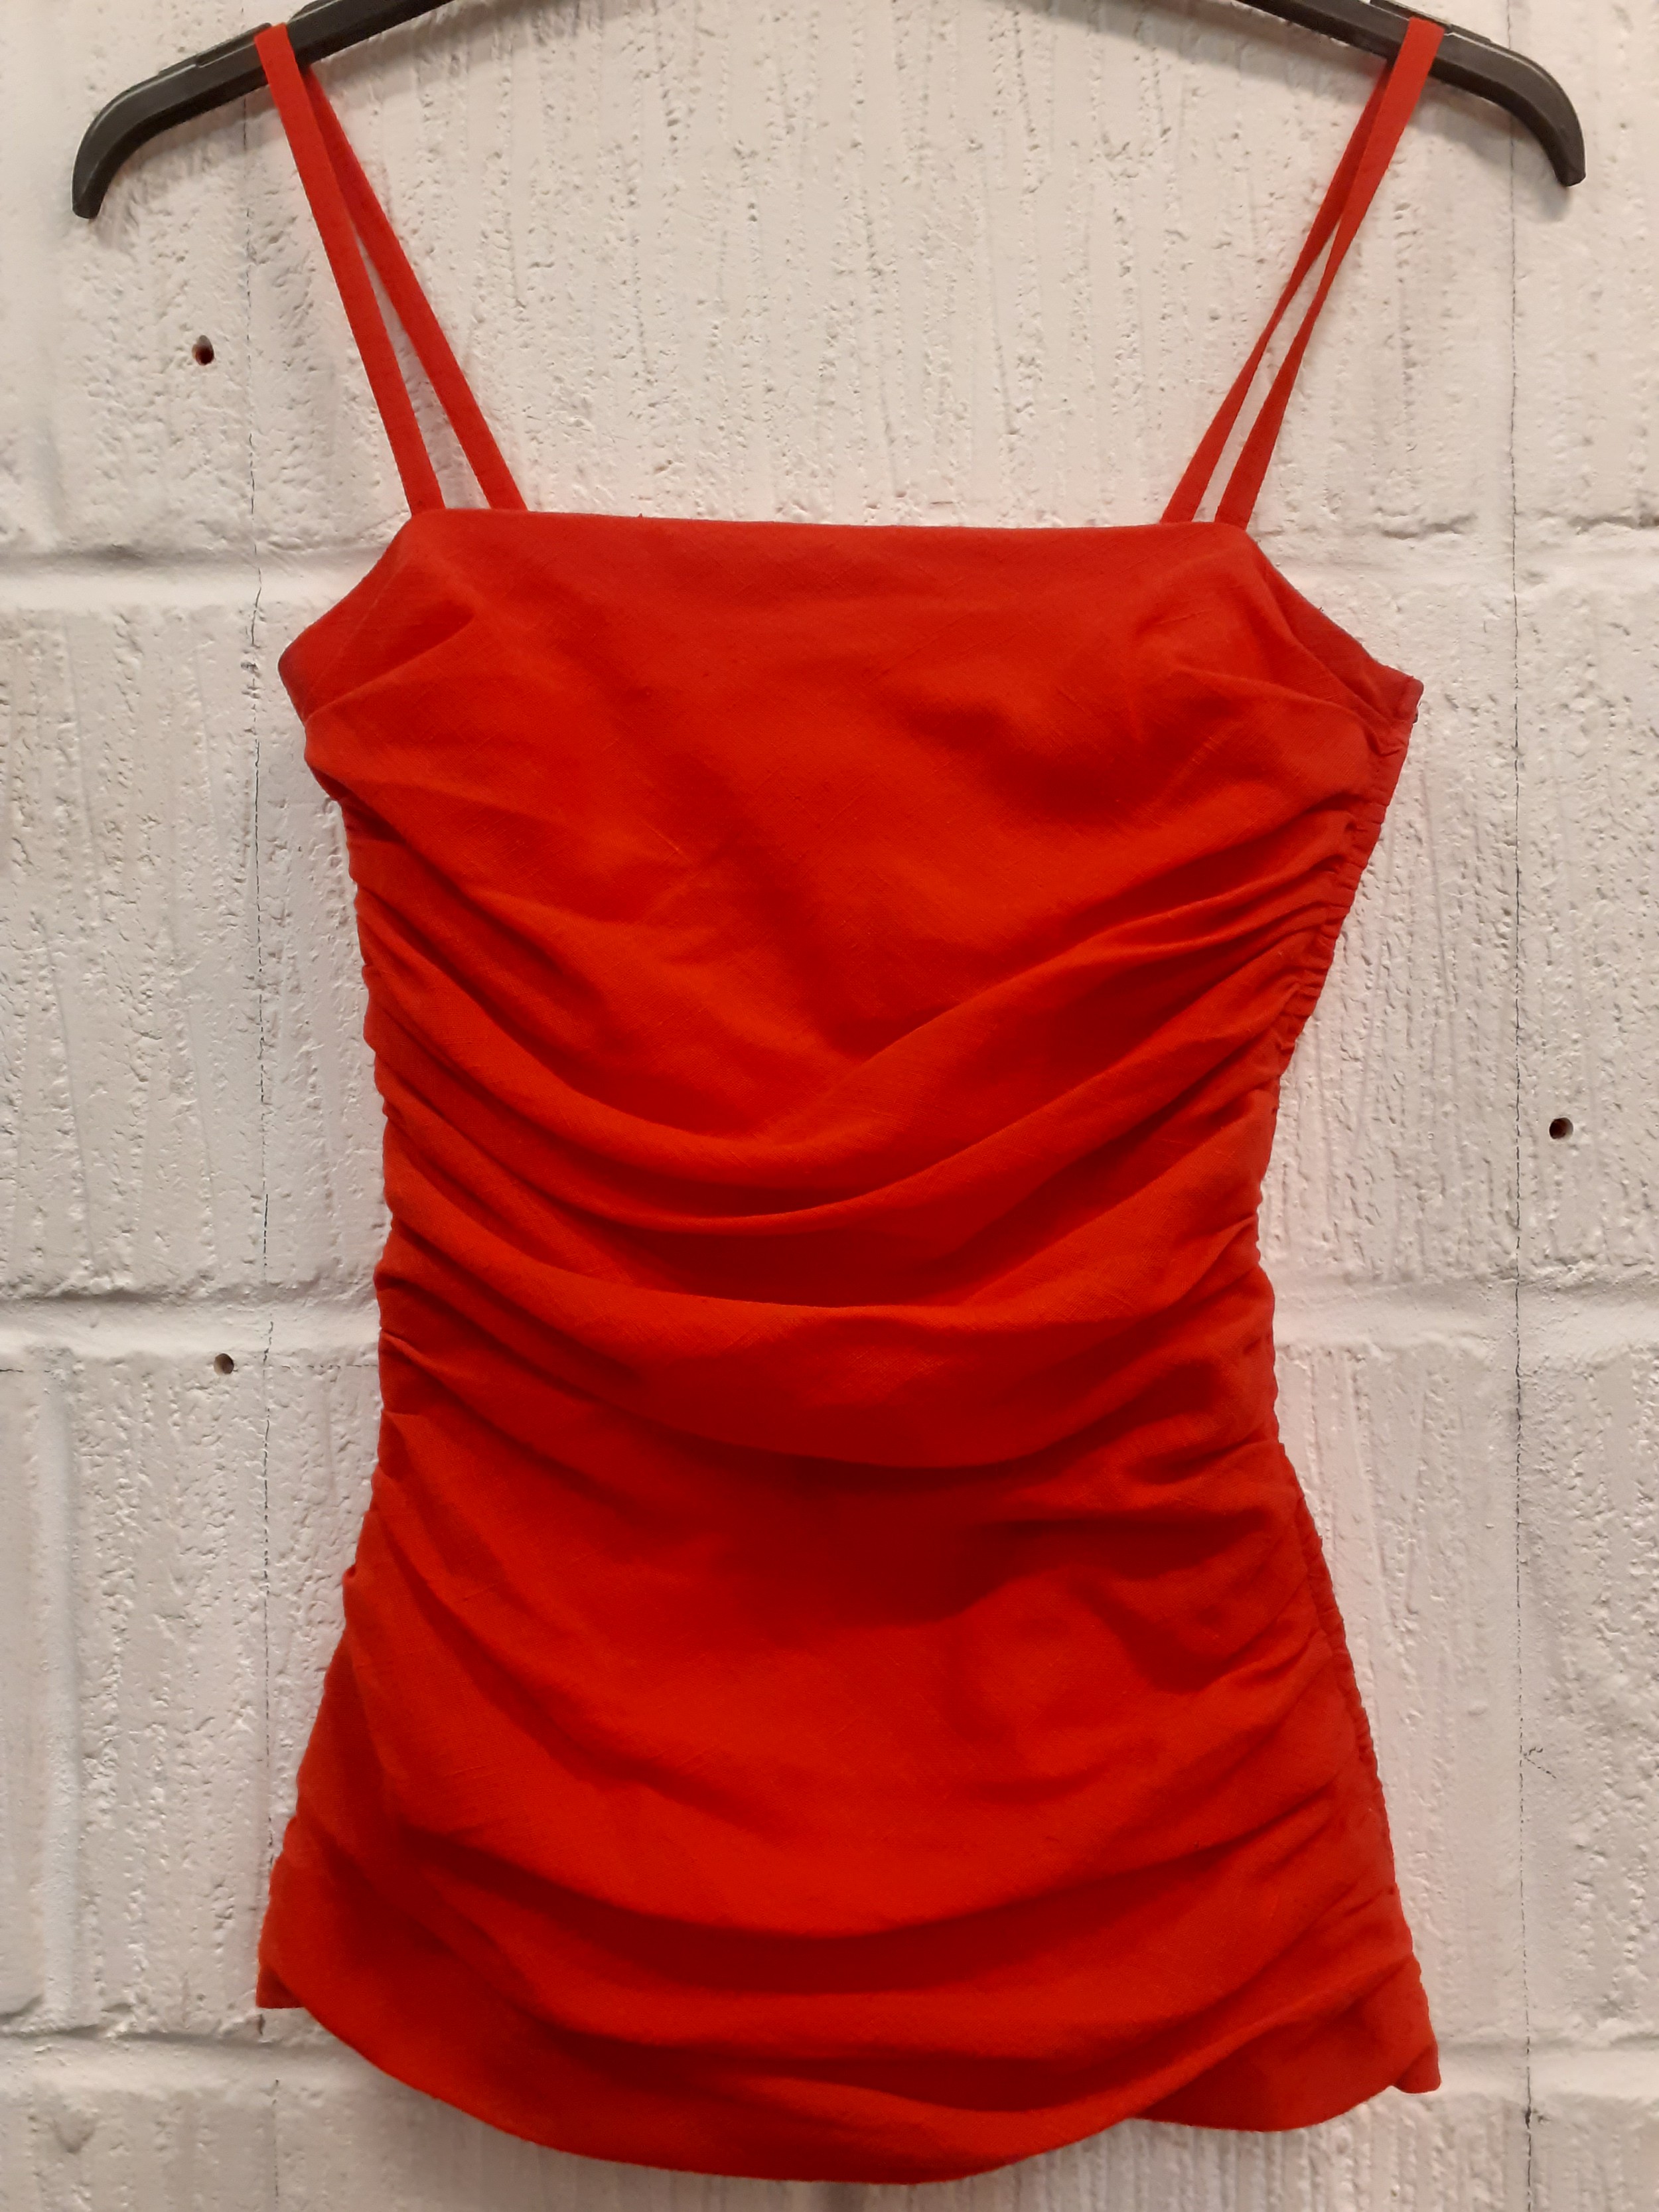 YSL-A Saint Laurent Rive Gauche red ruched top with shoulder straps and side zip, European size 36 - Image 11 of 18